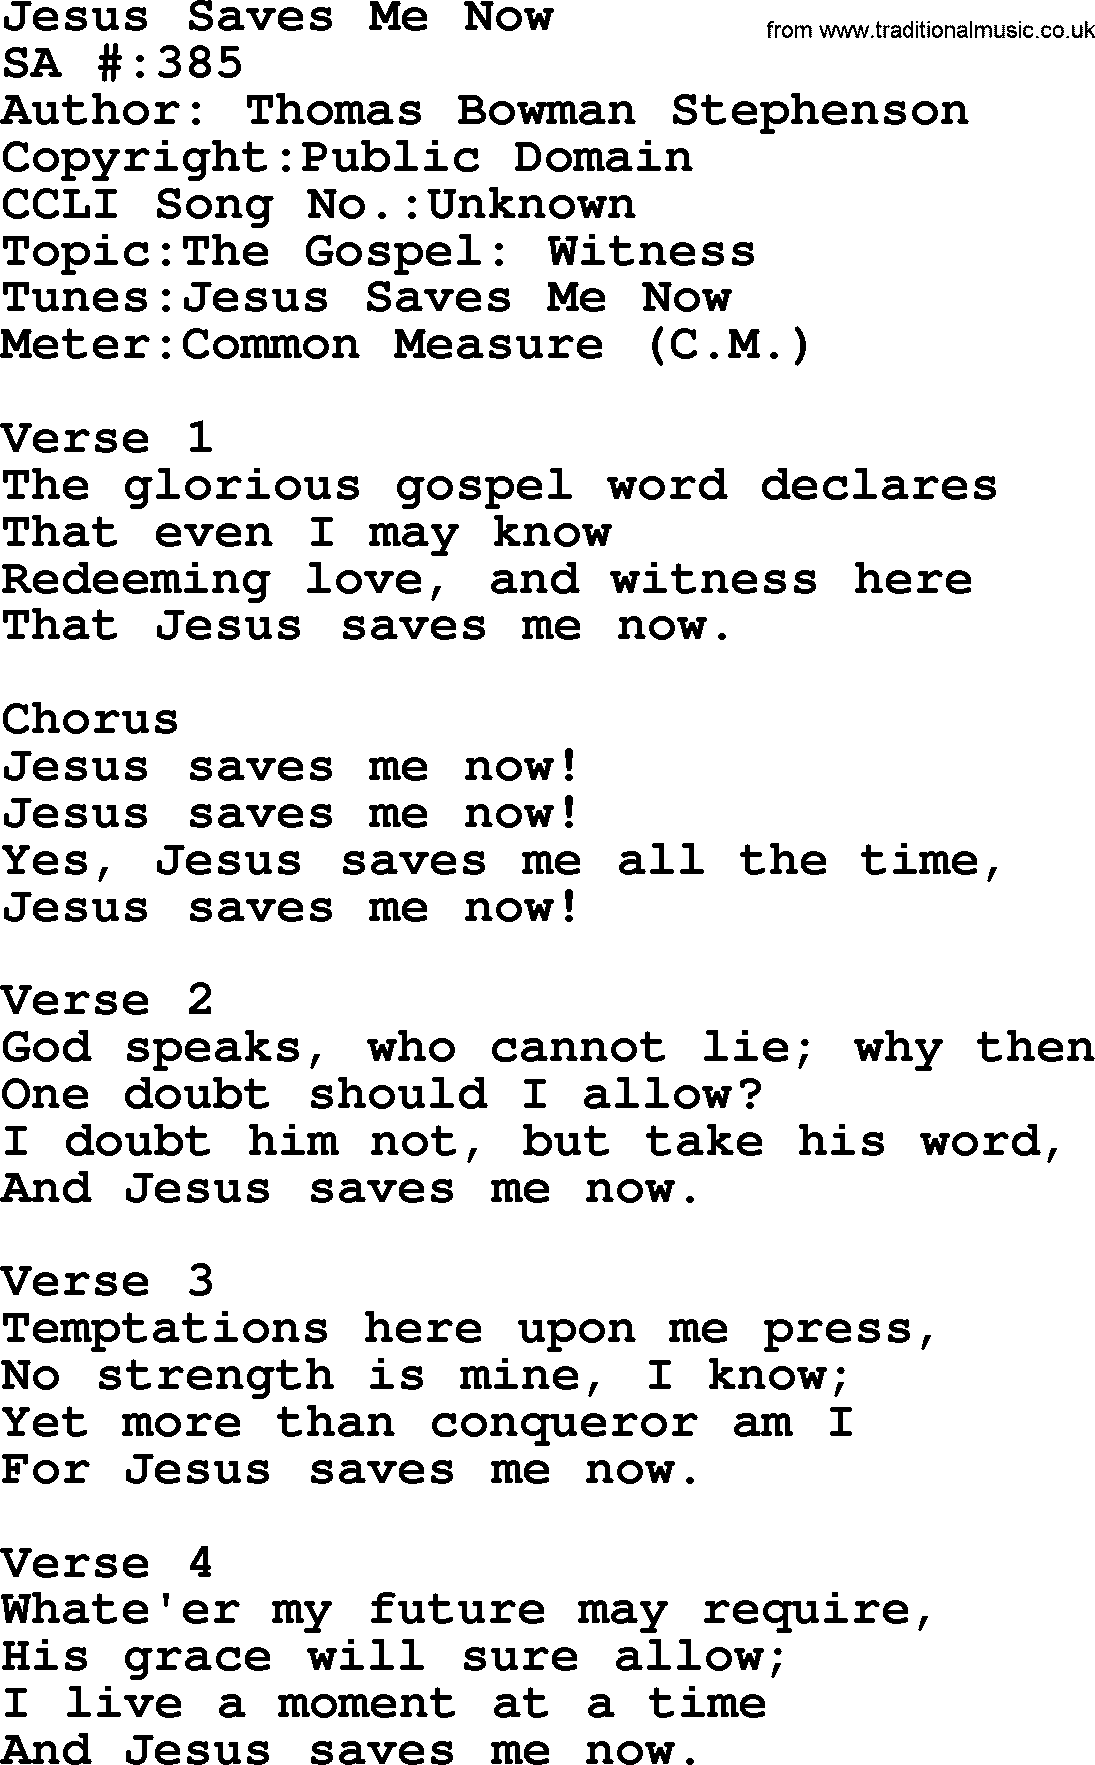 Salvation Army Hymnal, title: Jesus Saves Me Now, with lyrics and PDF,